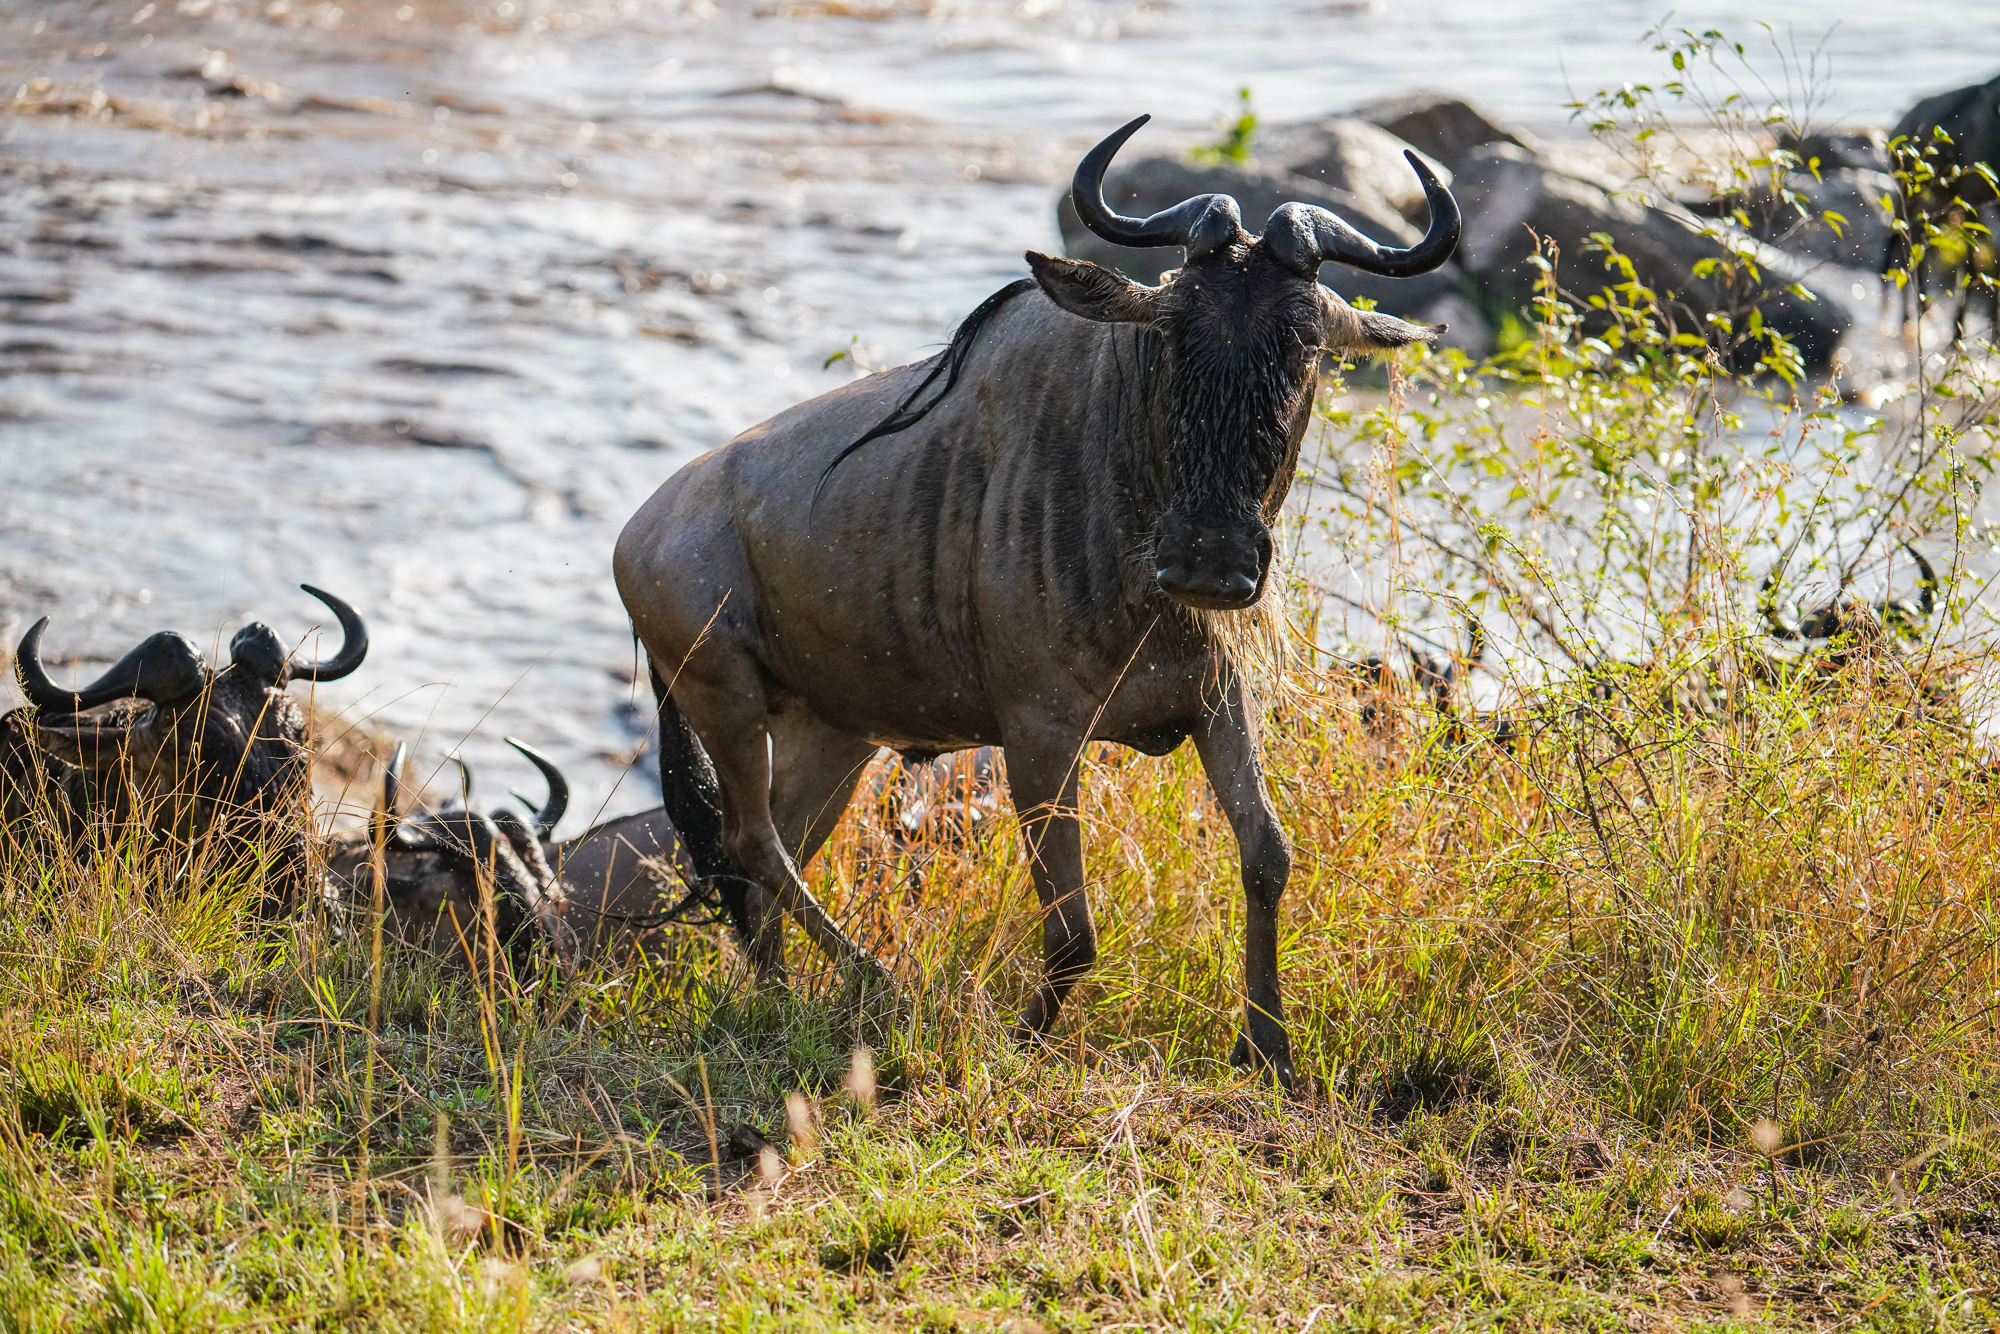 Wildebeest after crossing the Mara River